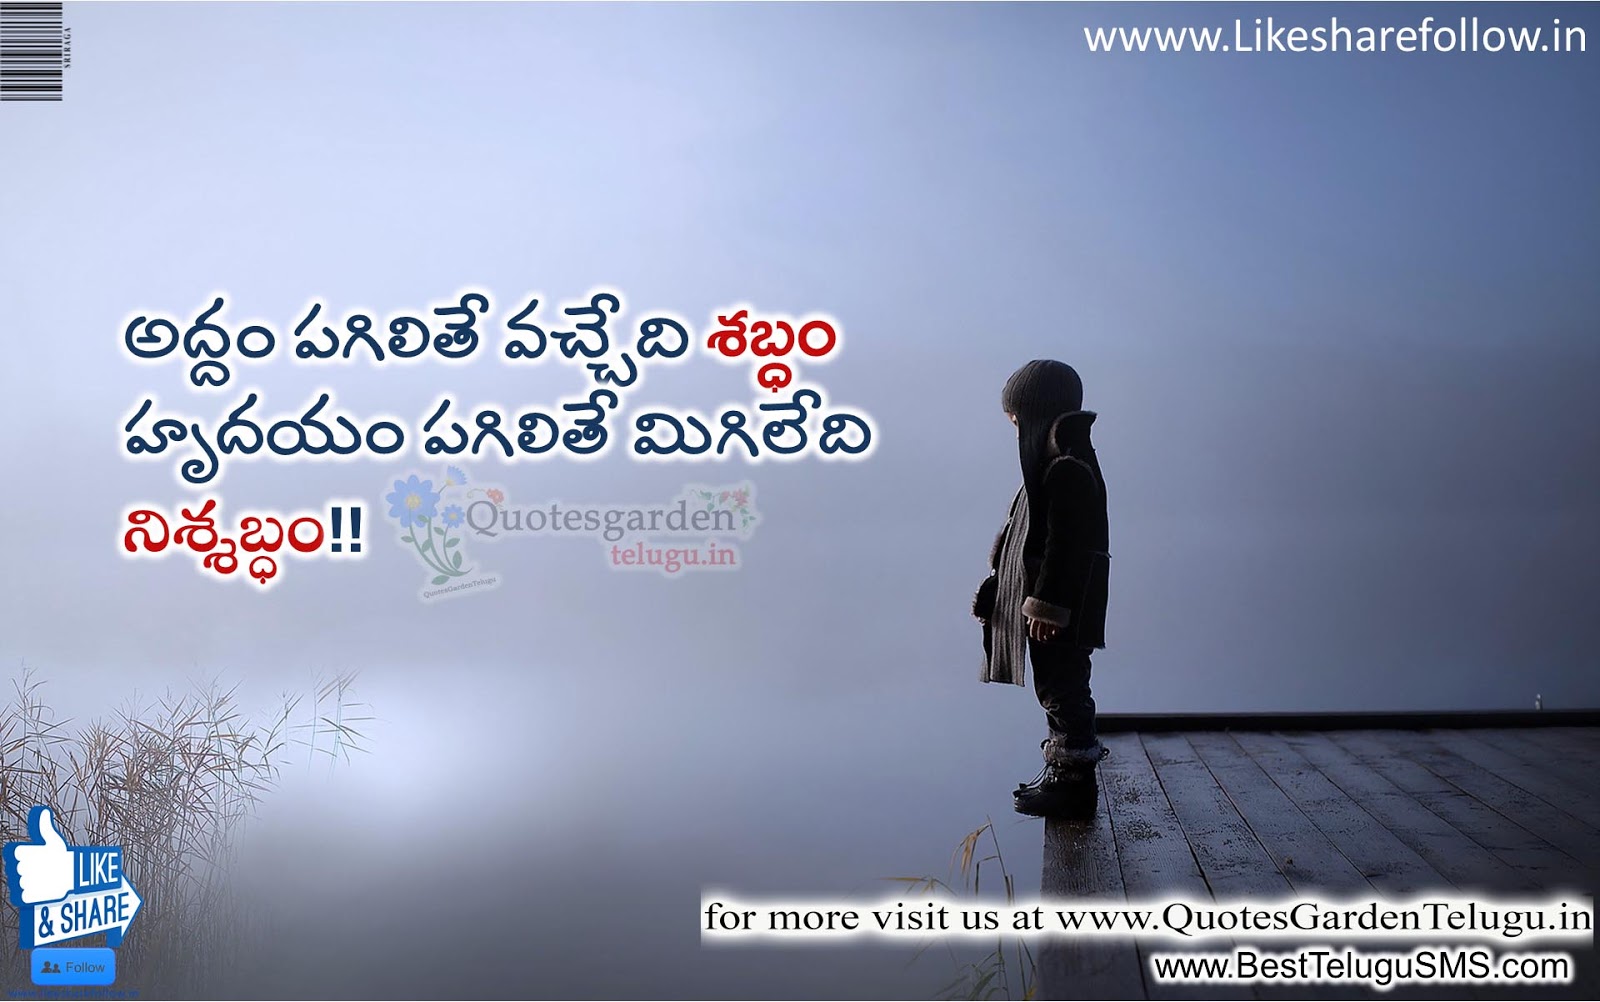 telugu heart touching quotes for facebook | Like Share Follow